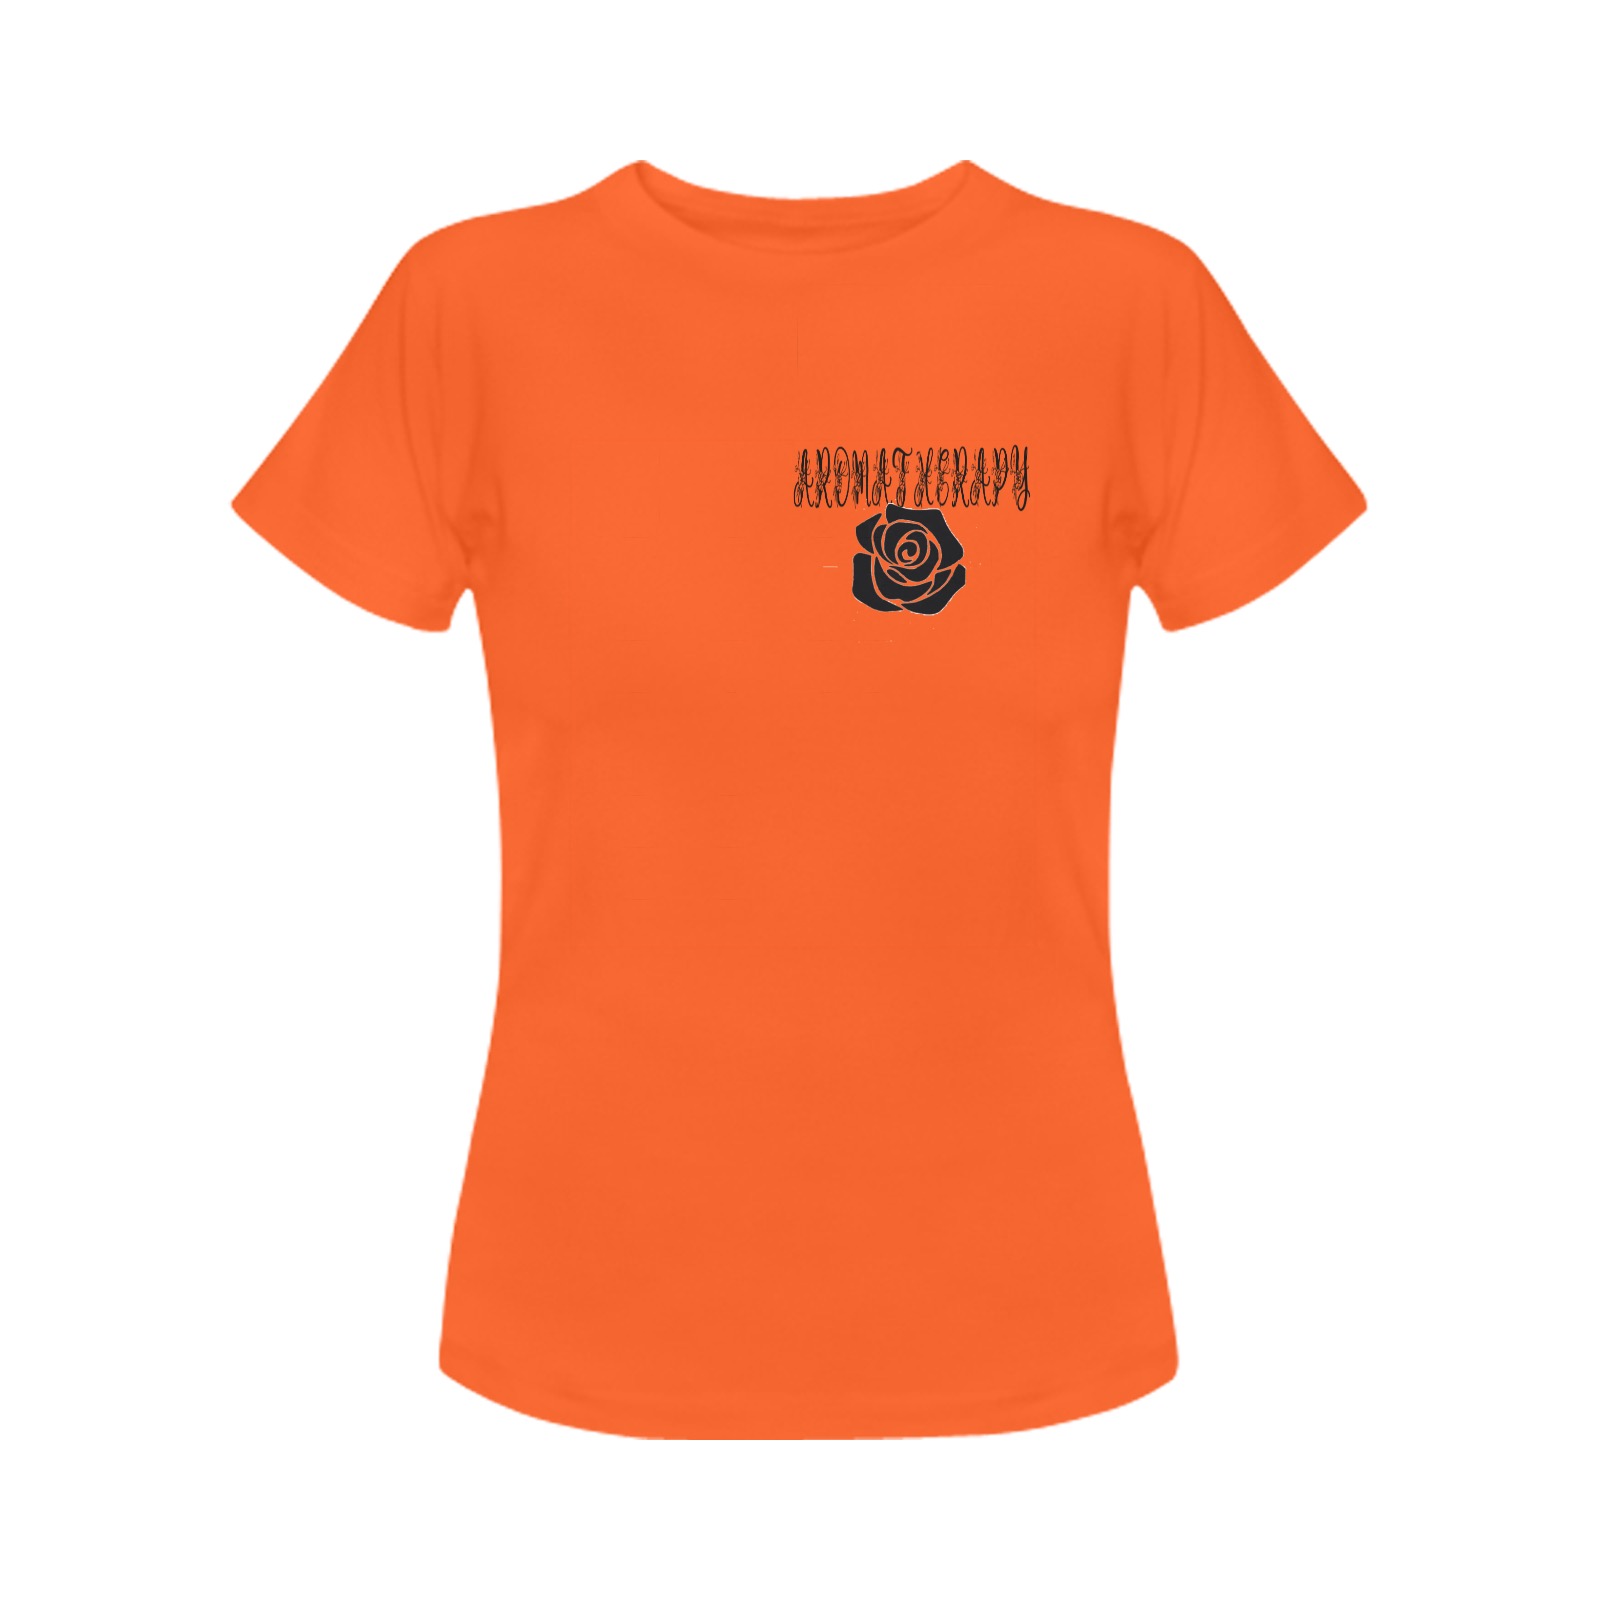 Womens Aromatherapy Apparel Black rose T-Shirt Orange Women's T-Shirt in USA Size (Front Printing Only)